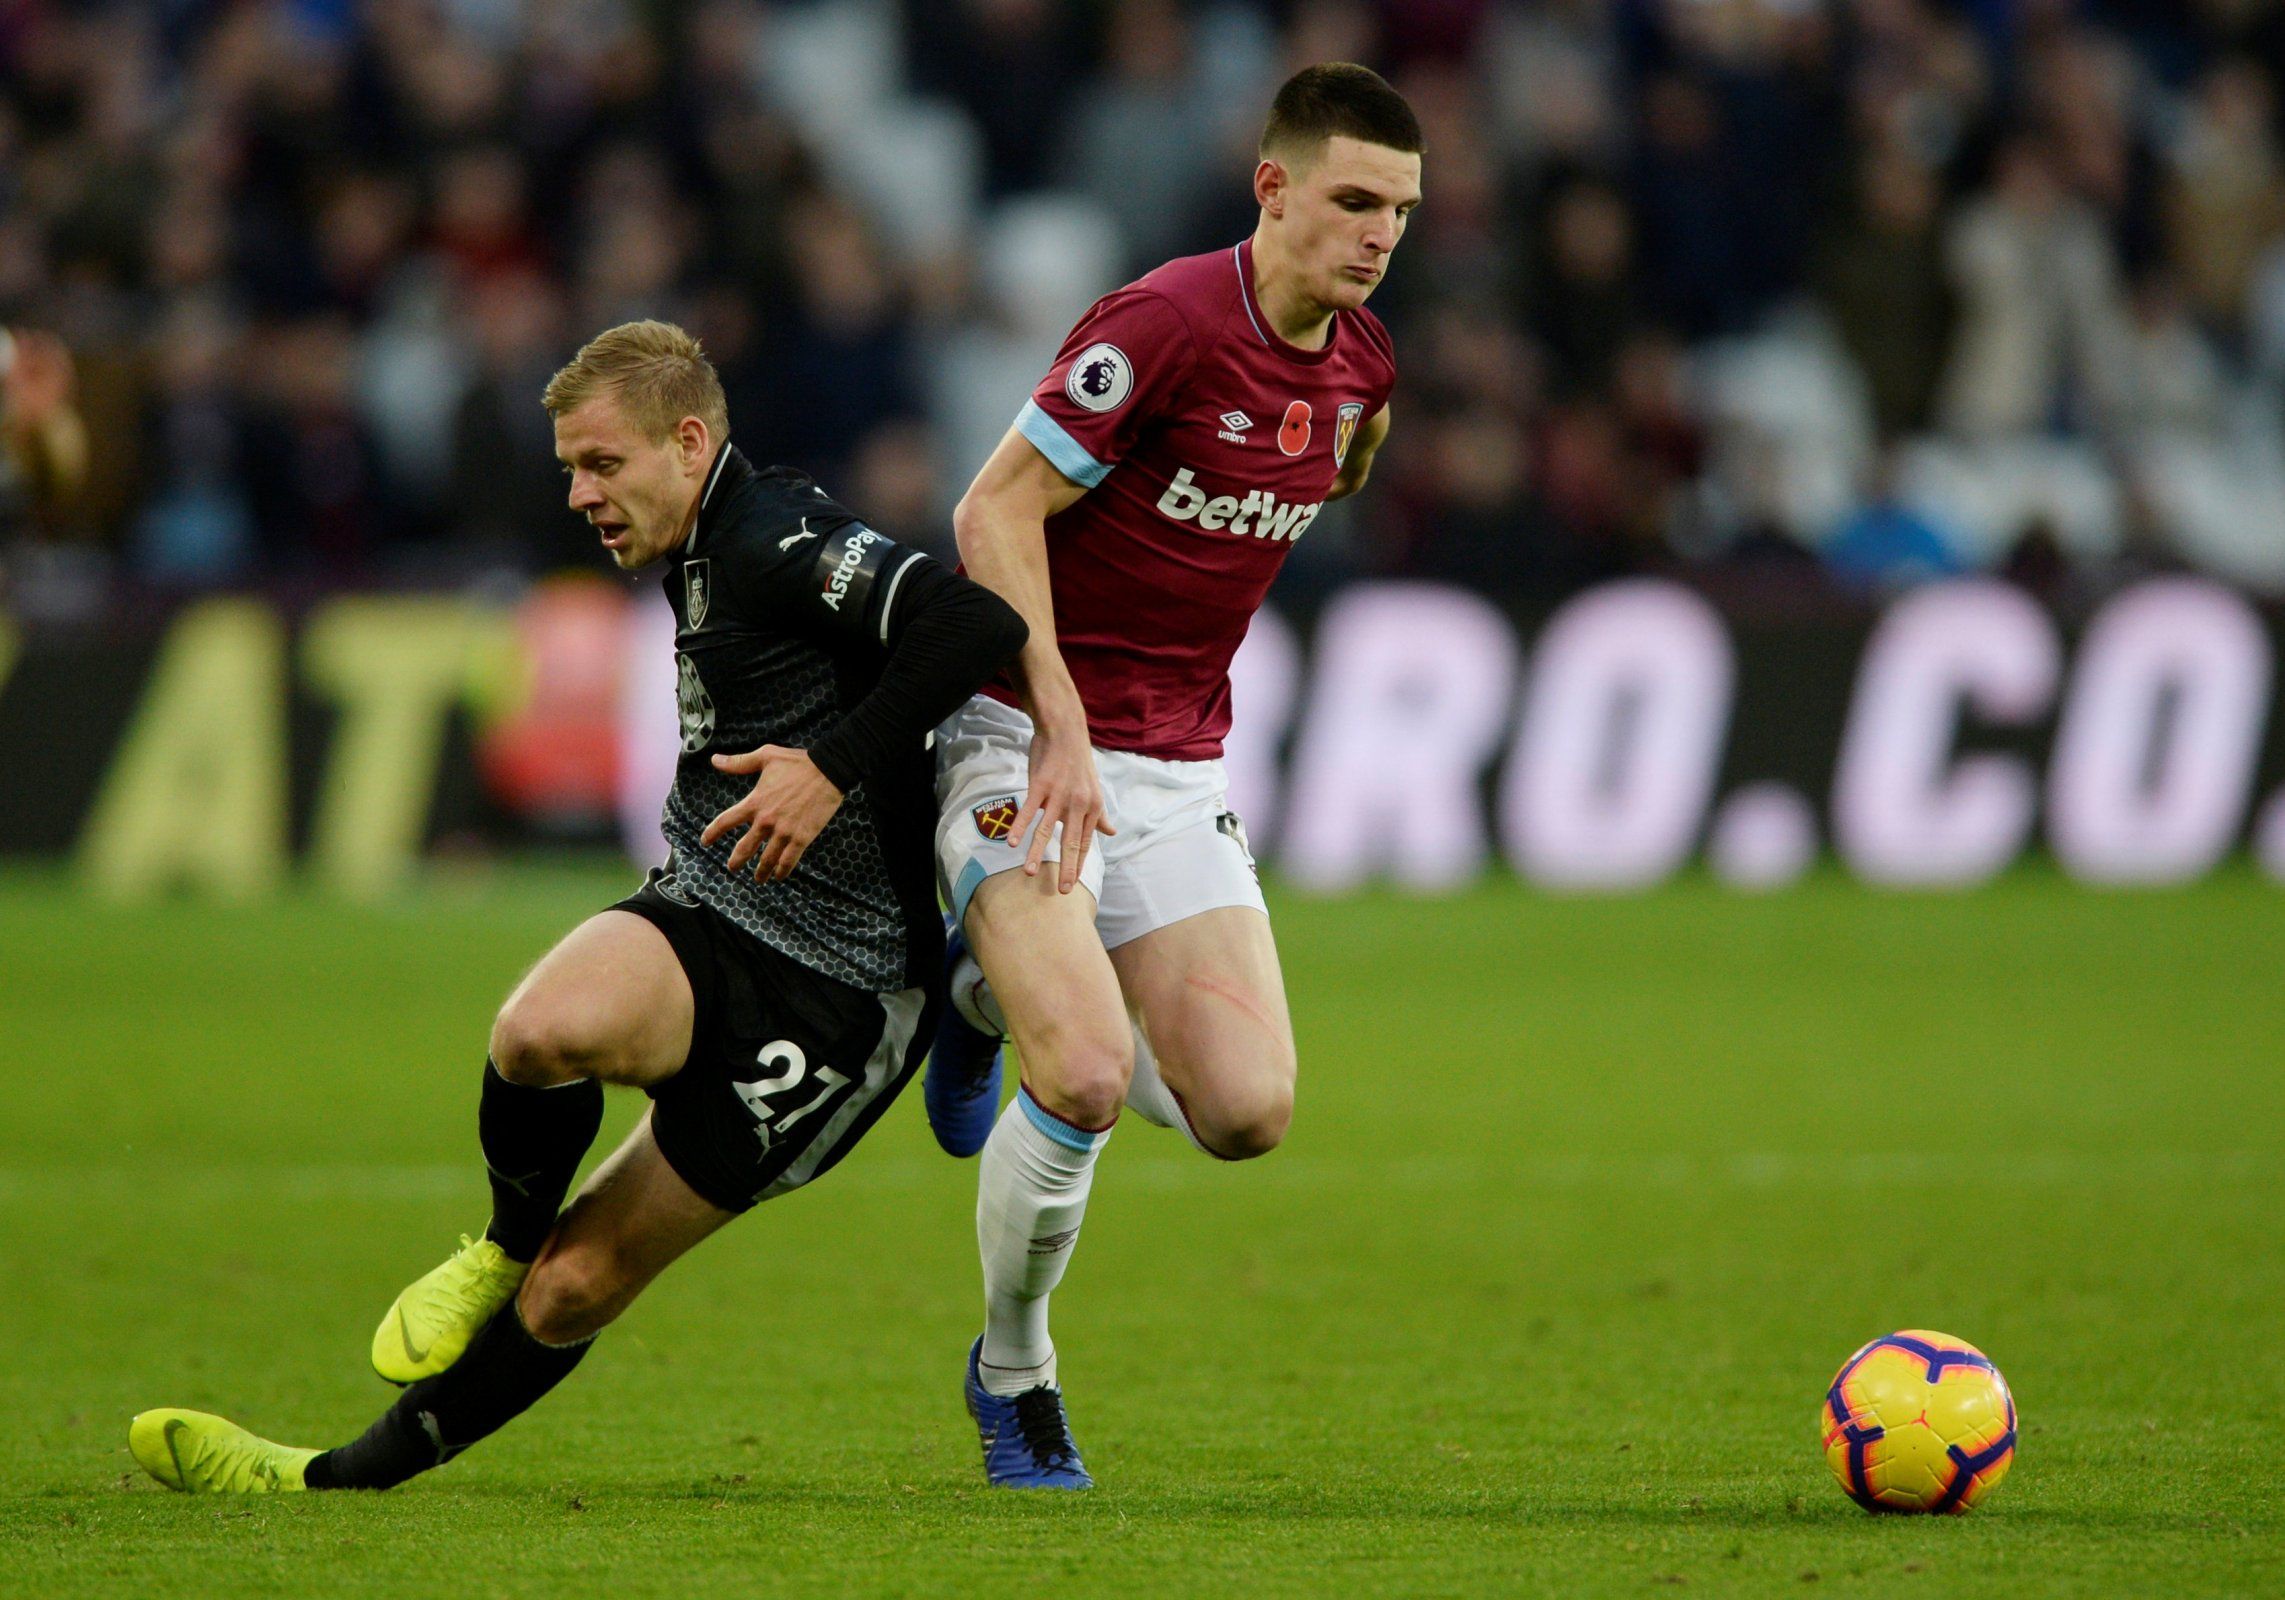 Burnley's Matej Vydra out-muscled by West Ham's Declan Rice